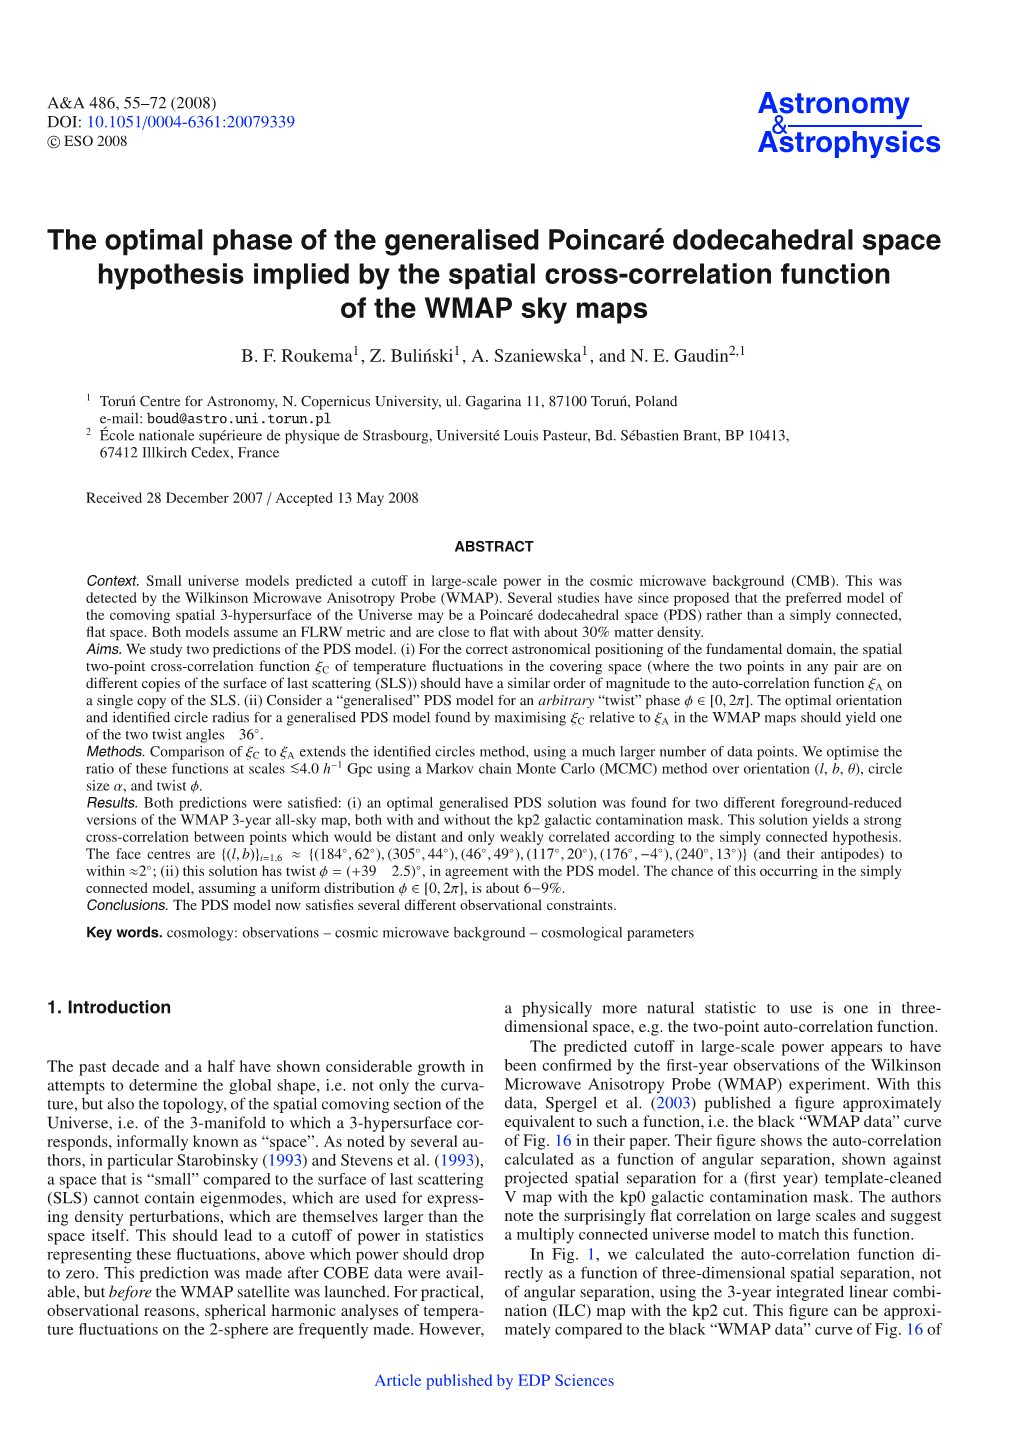 The Optimal Phase of the Generalised Poincaré Dodecahedral Space Hypothesis Implied by the Spatial Cross-Correlation Function of the WMAP Sky Maps